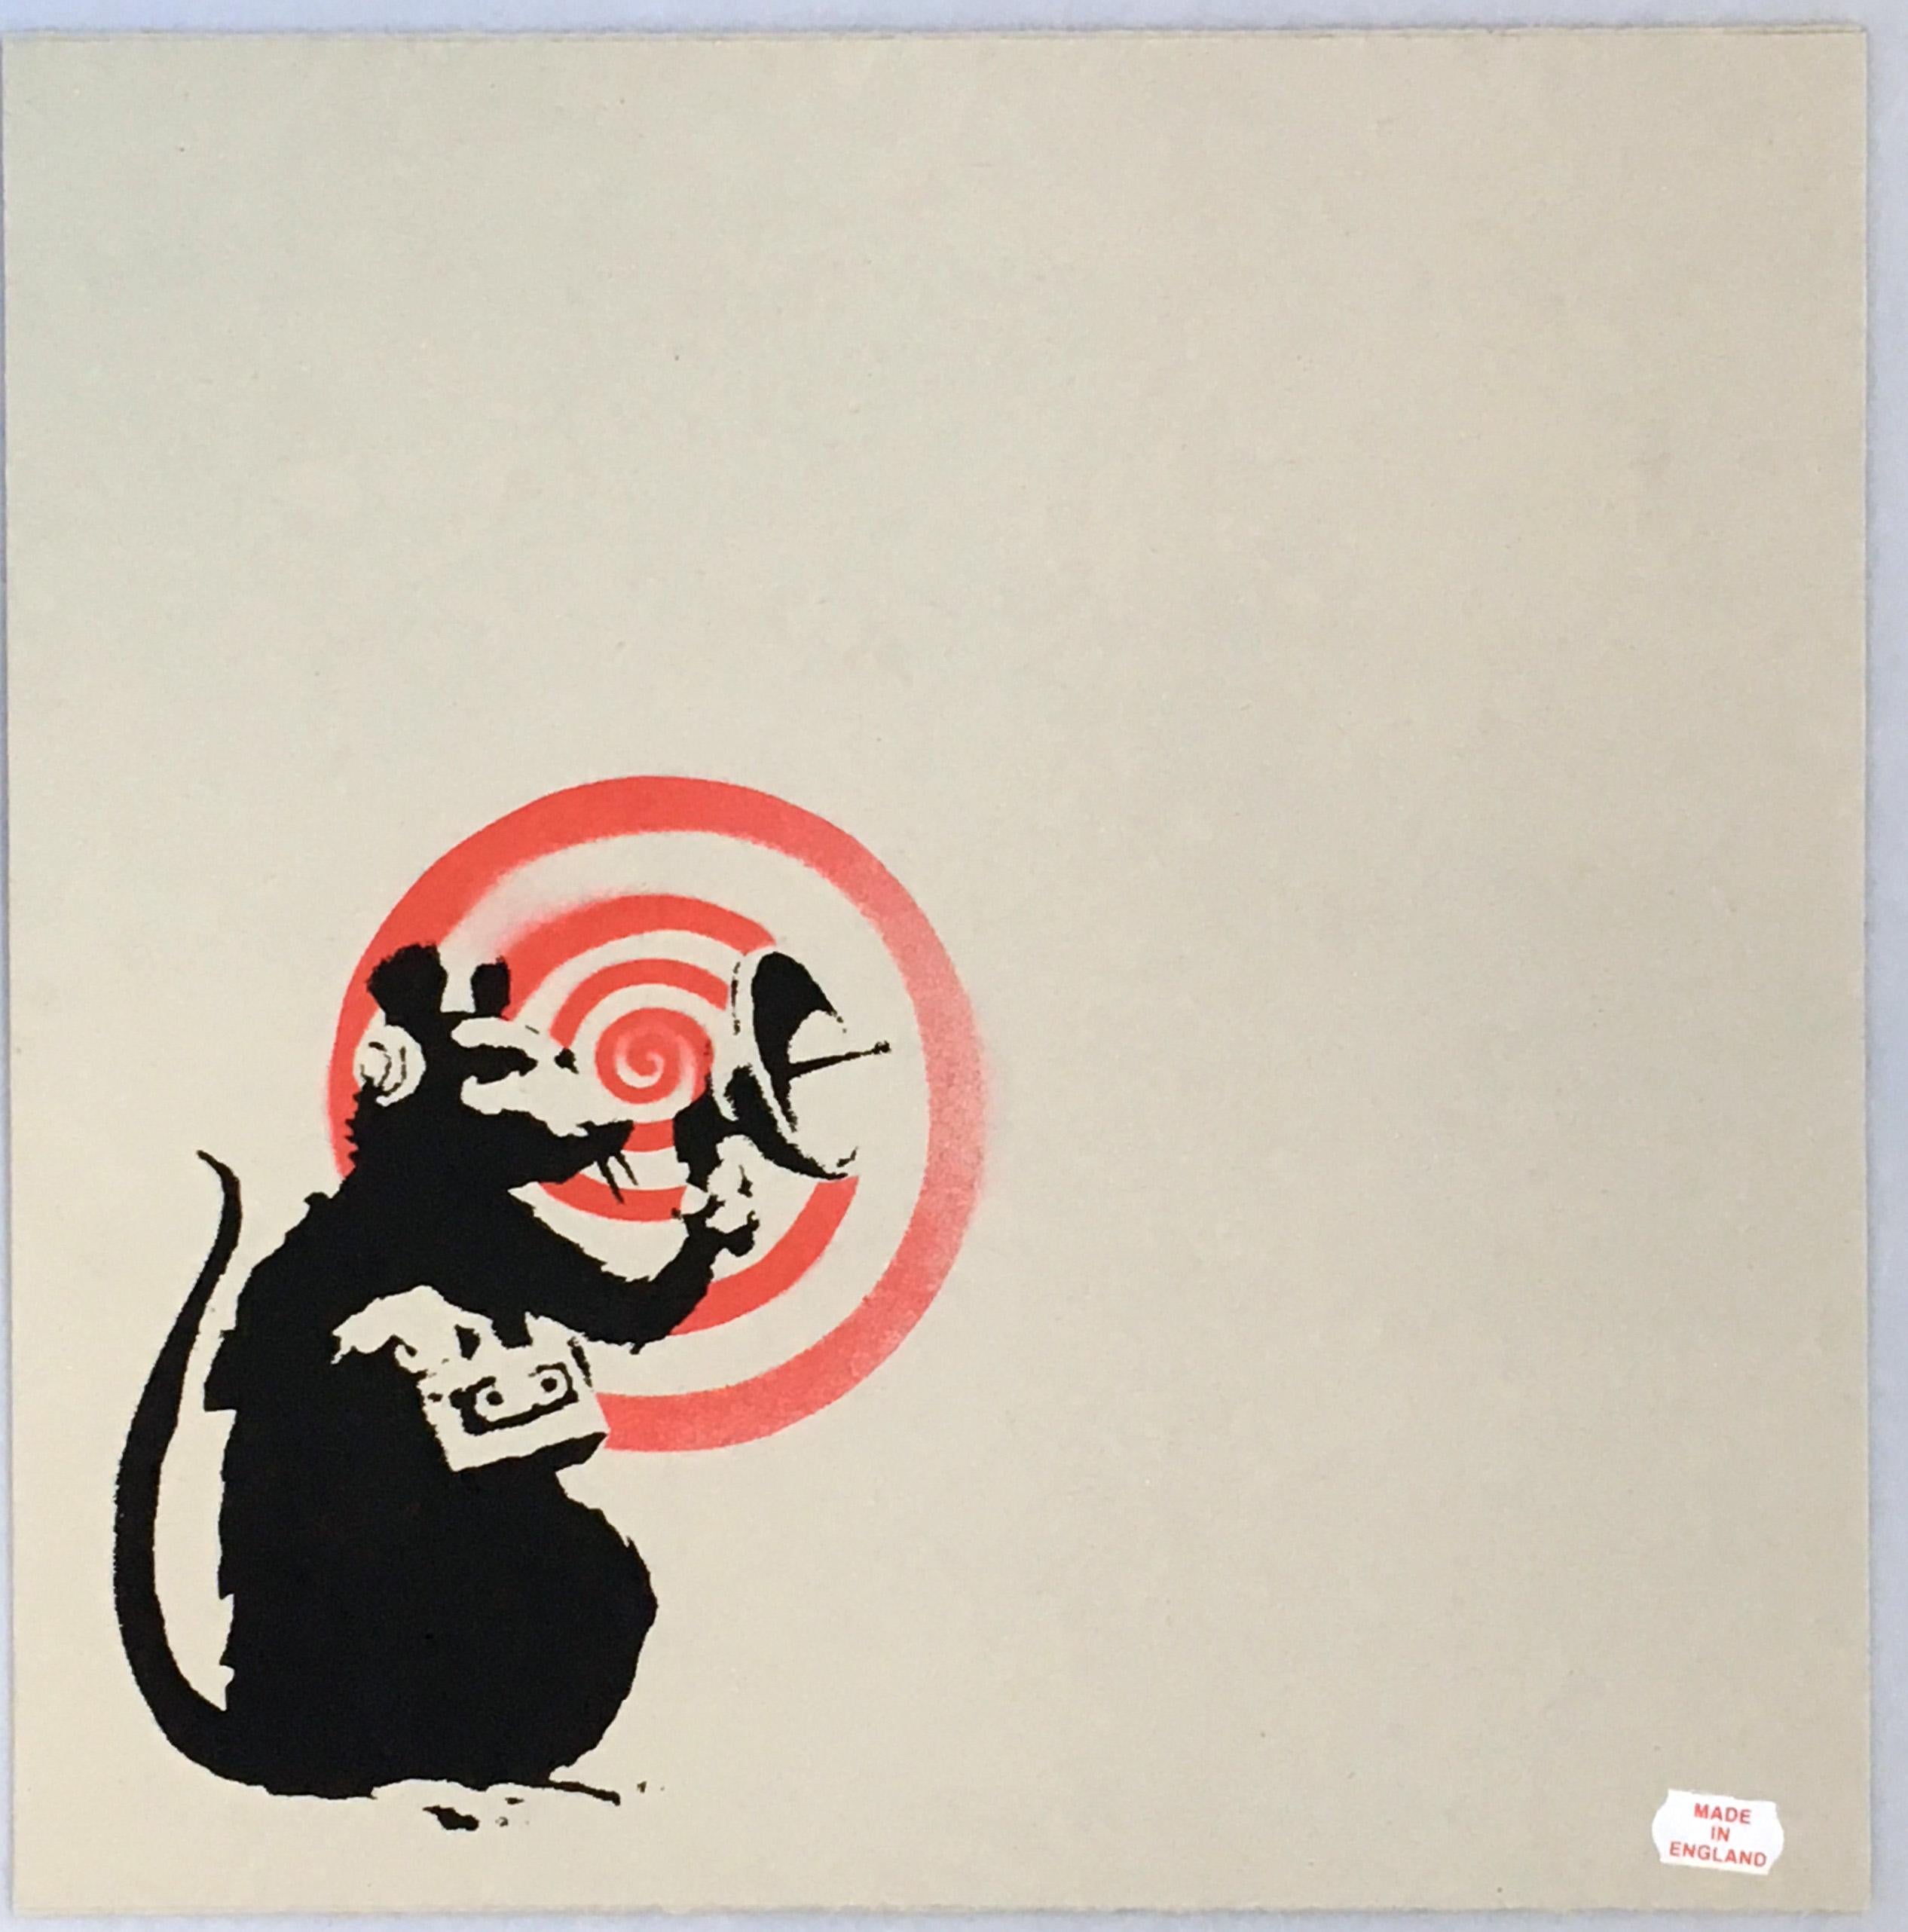 Banksy produced this cover & record label art for his friends Dirty Funker in 2008. Featured here is Banksy's world-renowned Radar Rat Dirty Funker

Silkscreen on Record Sleeve and Vinyl Record; 2008
Dimensions: 12 x12 in (30 x 30 cm)
Cover: Very